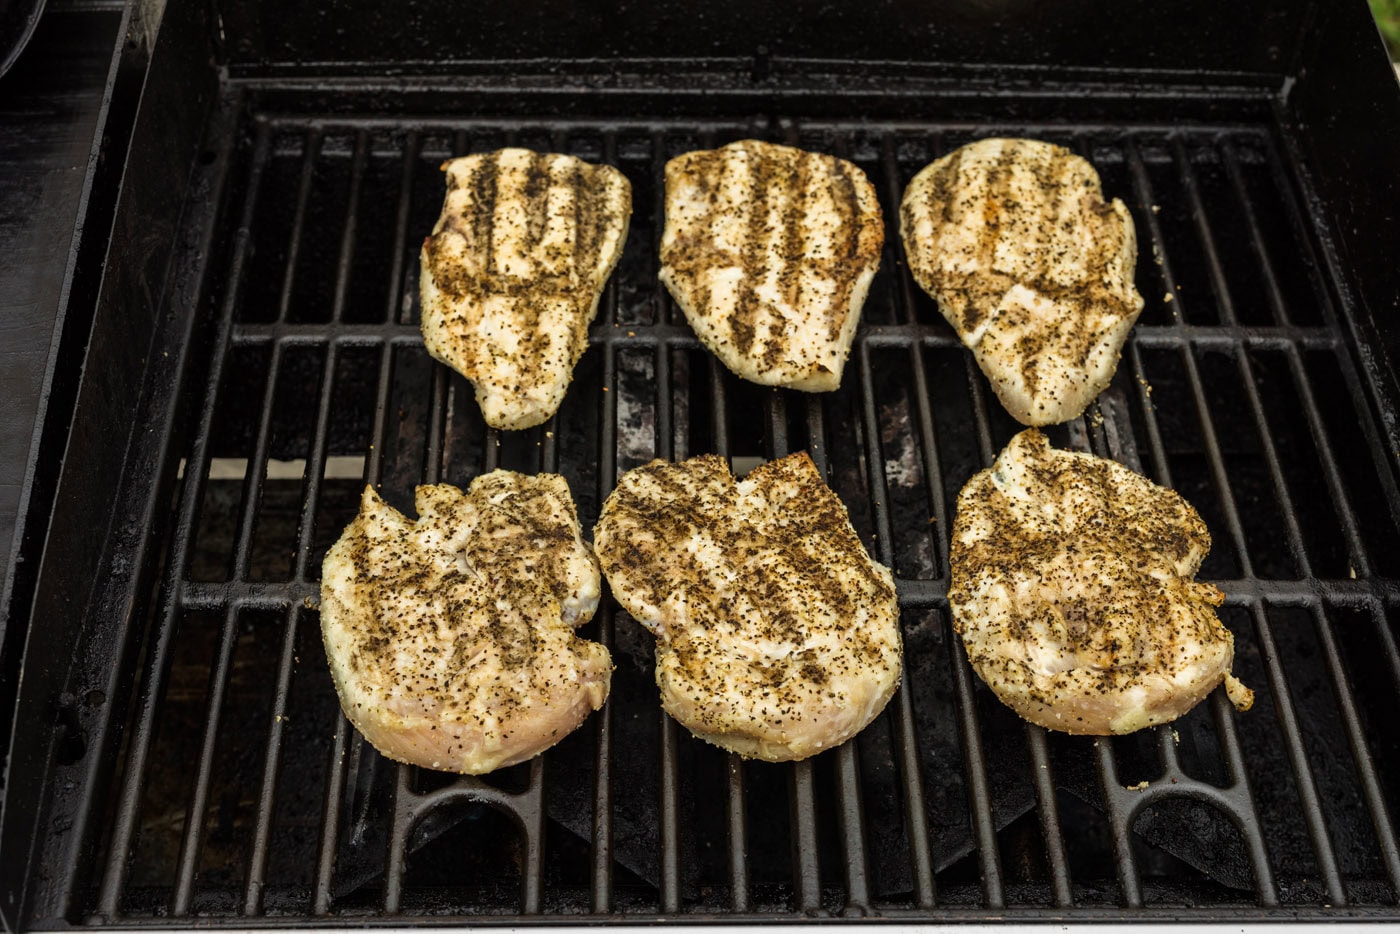 chicken breast with grill marks on a grill grate